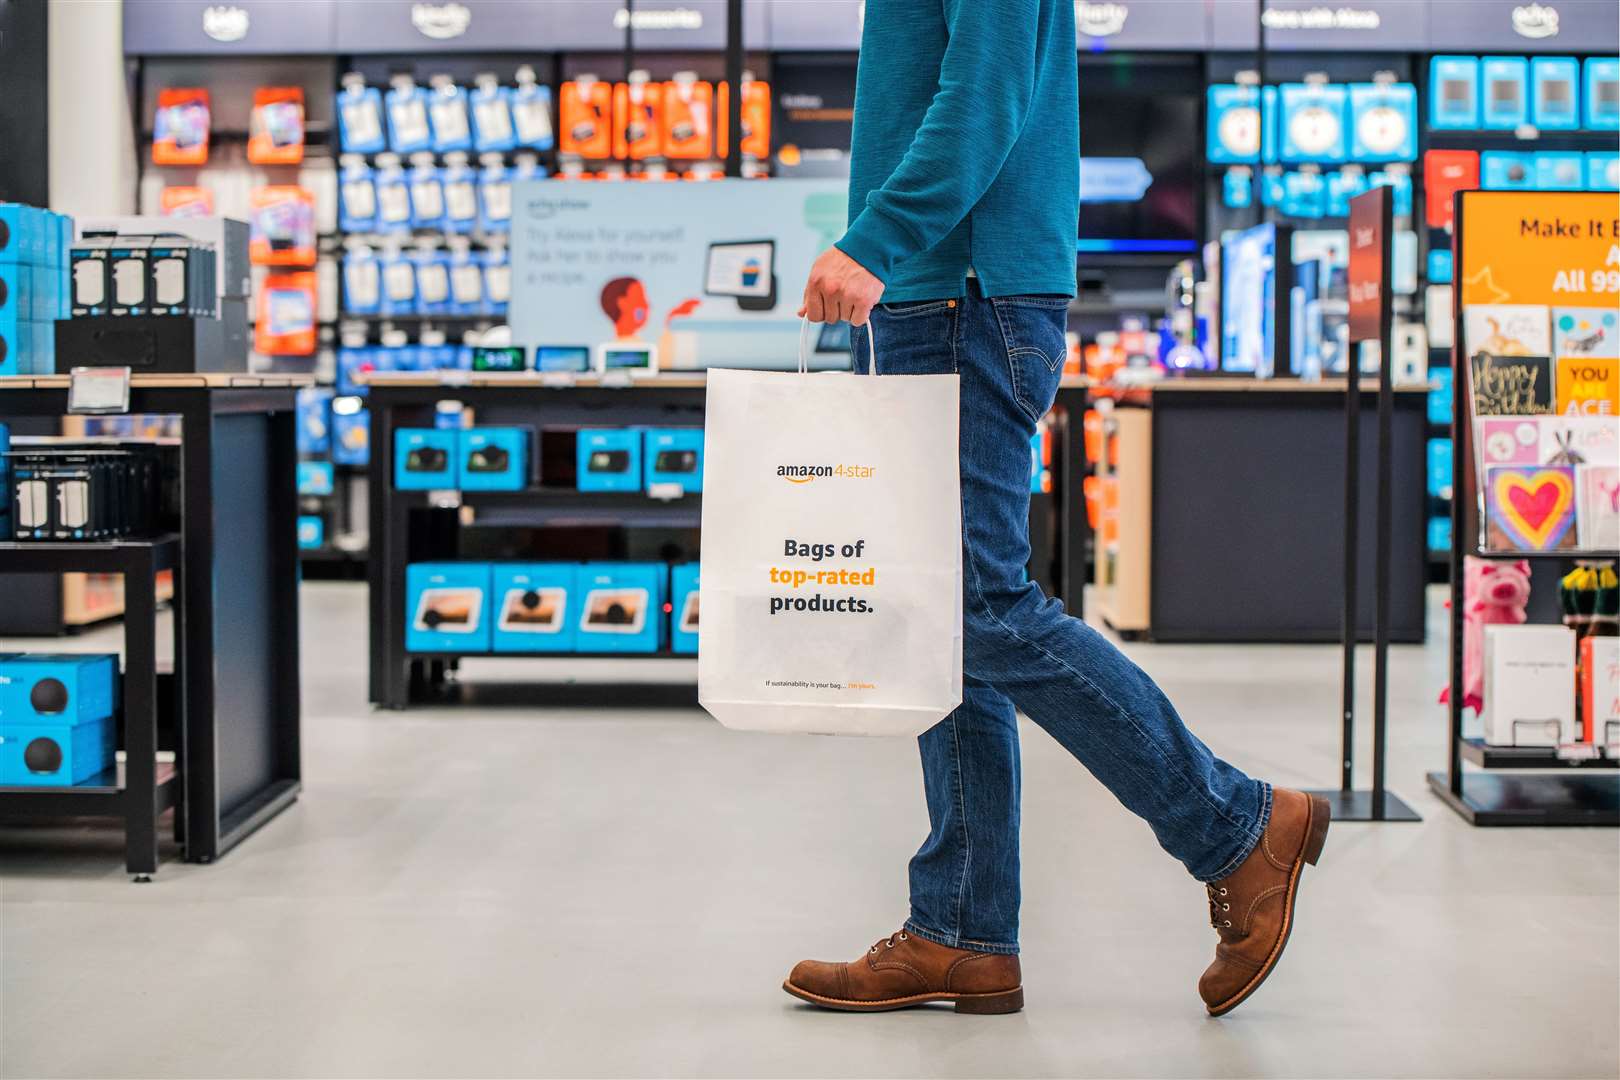 Amazon says it wants to focus on its Amazon Fresh concept following the closure of its 4-star store in Bluewater.  Photo: Amazon